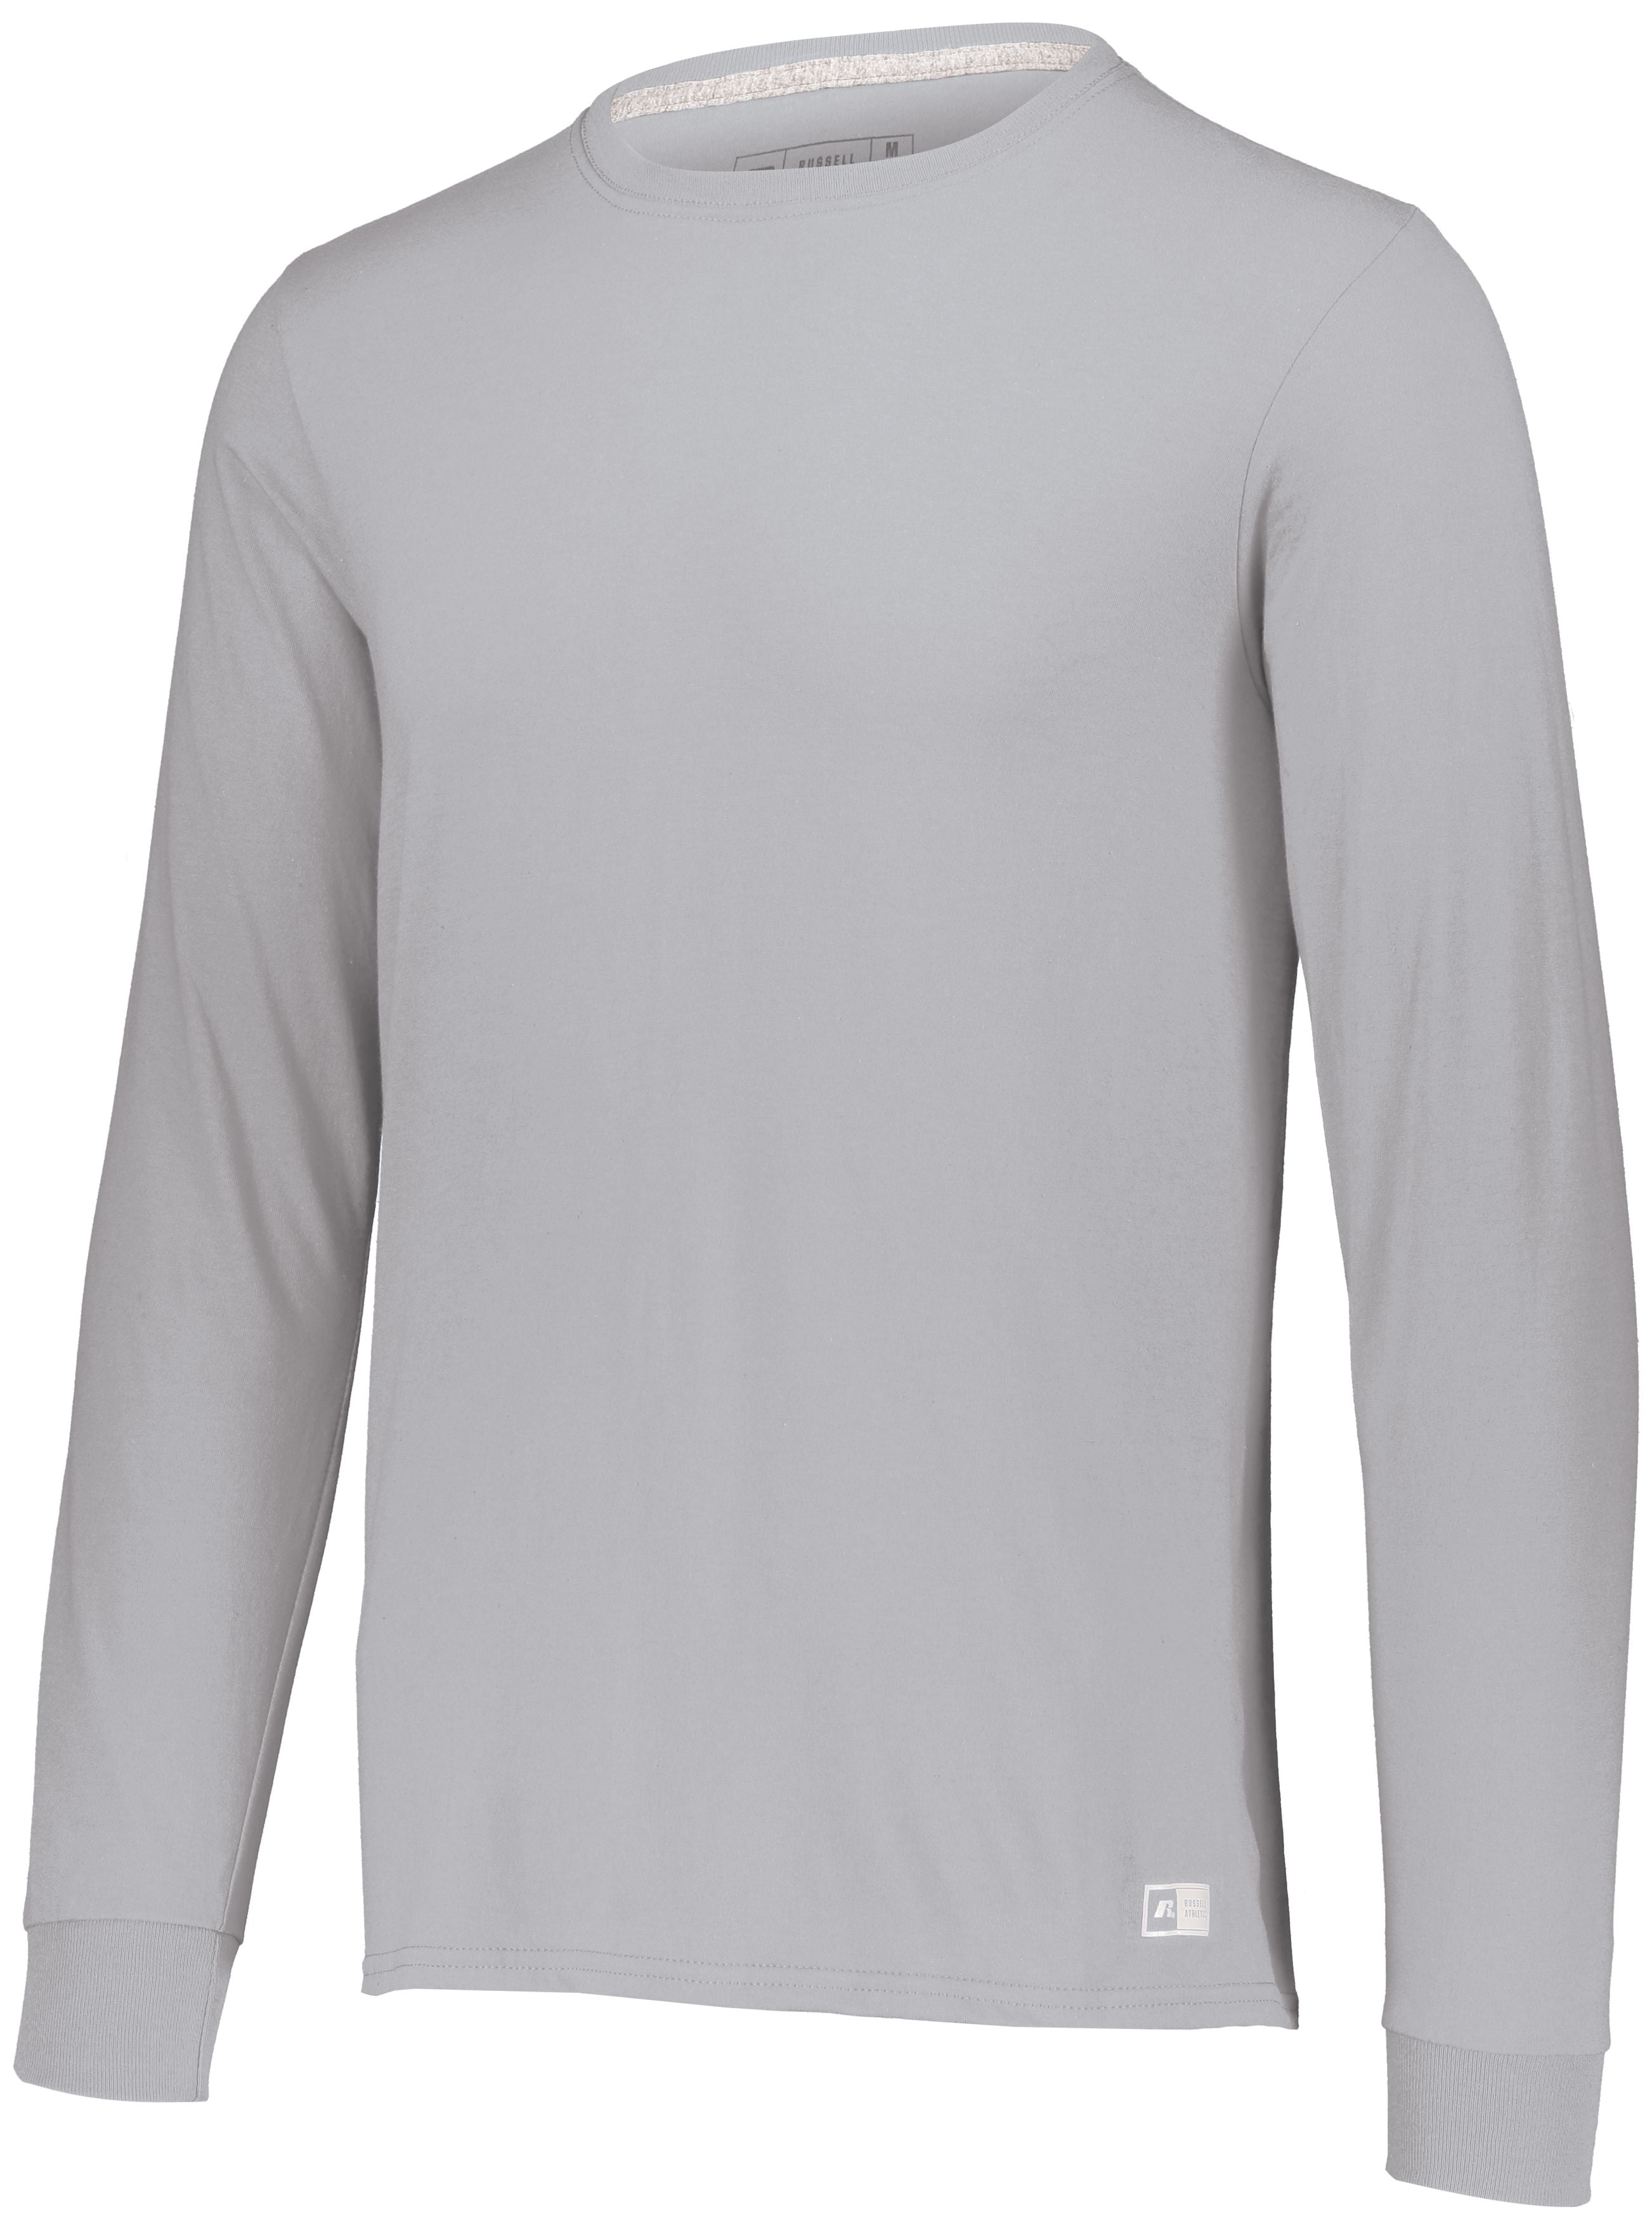 Russell Athletic Essential Long Sleeve Tee in Oxford  -Part of the Adult, Adult-Tee-Shirt, T-Shirts, Russell-Athletic-Products, Shirts product lines at KanaleyCreations.com